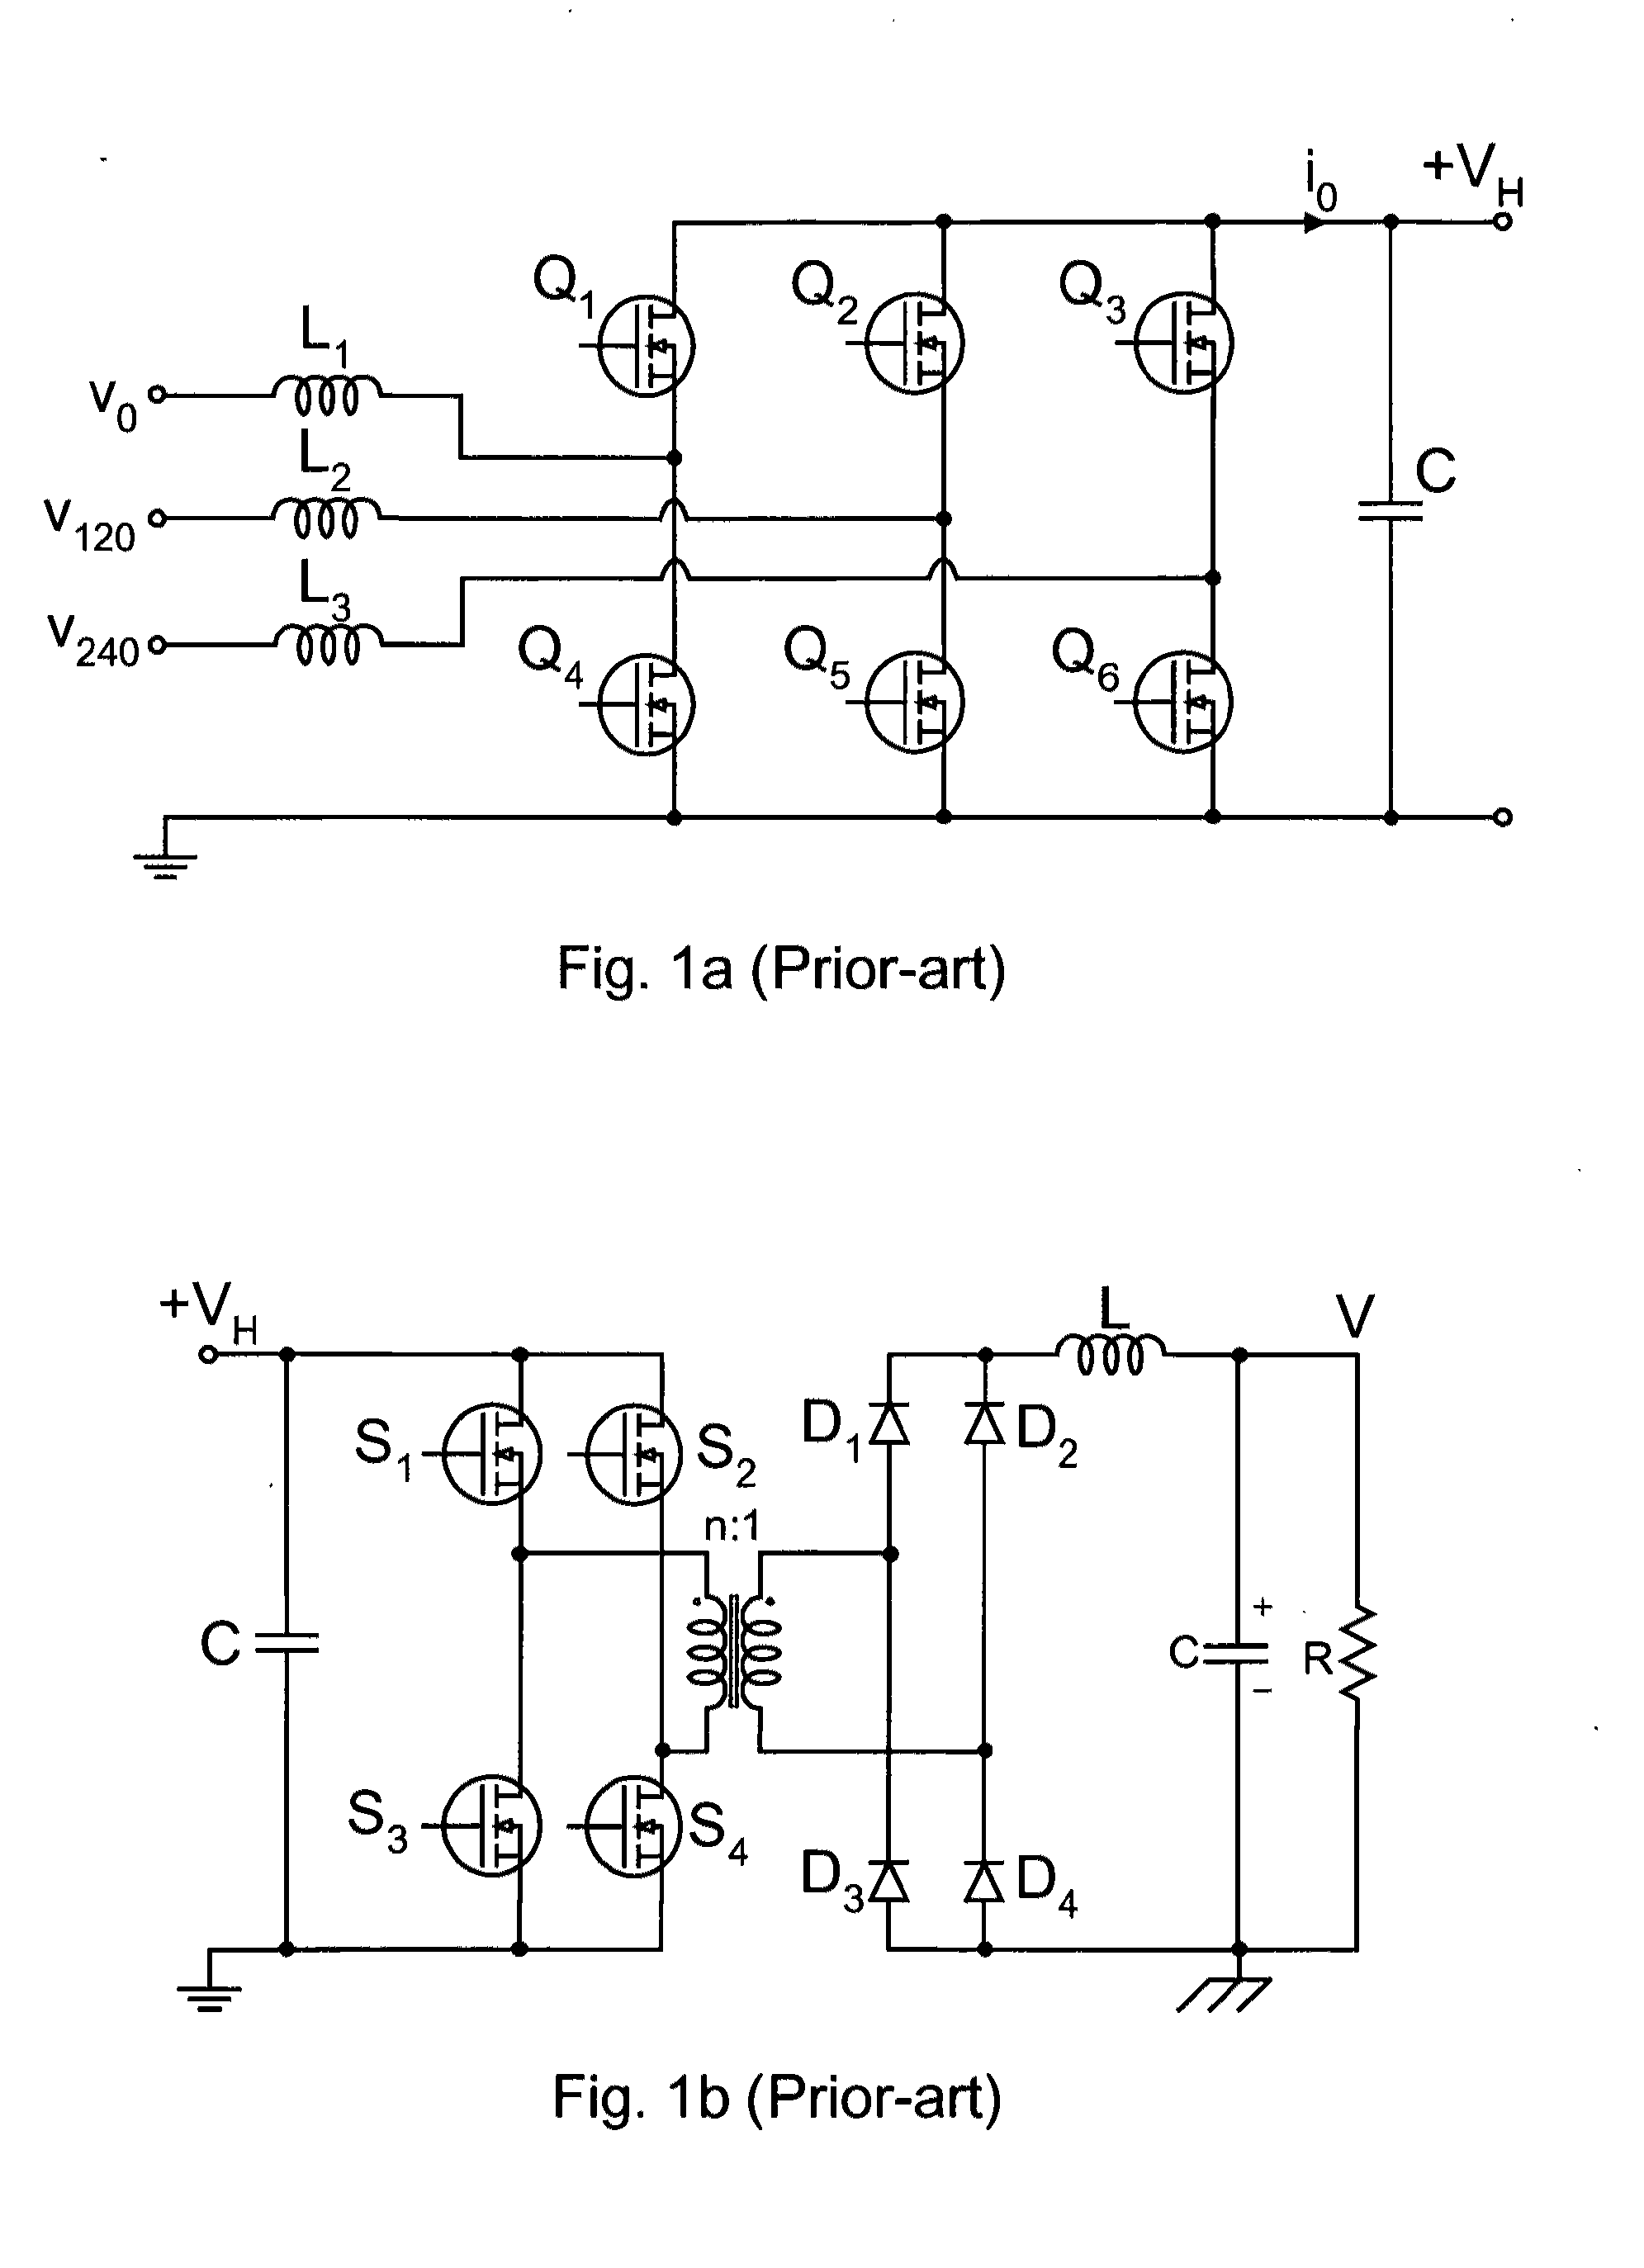 Three-phase isolated rectifer with power factor correction